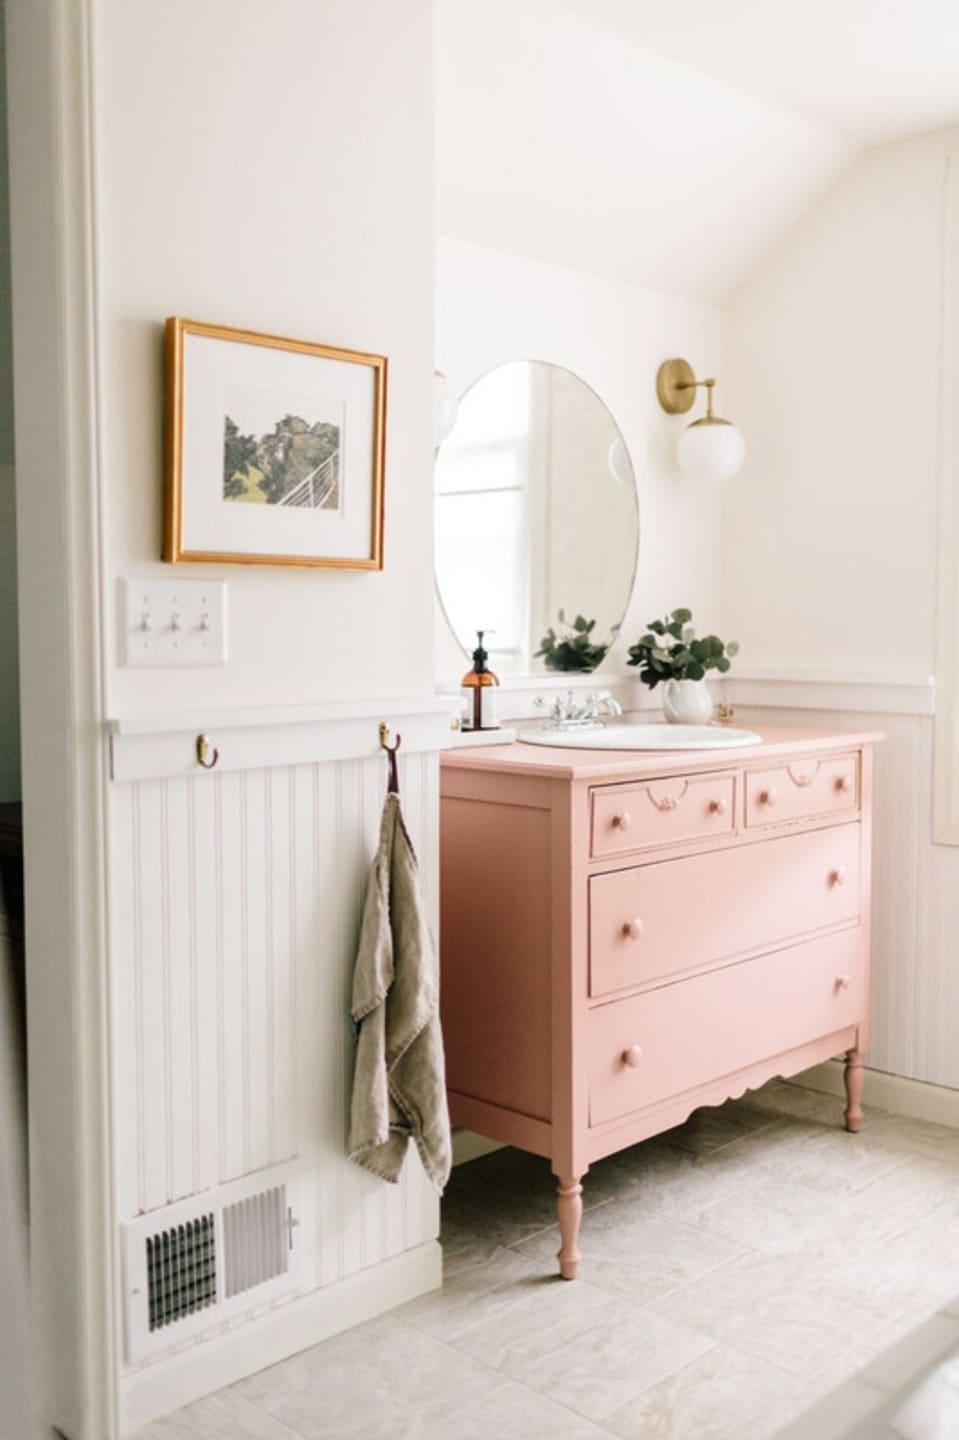 Bathroom wainscoting – what it is and how to use it?